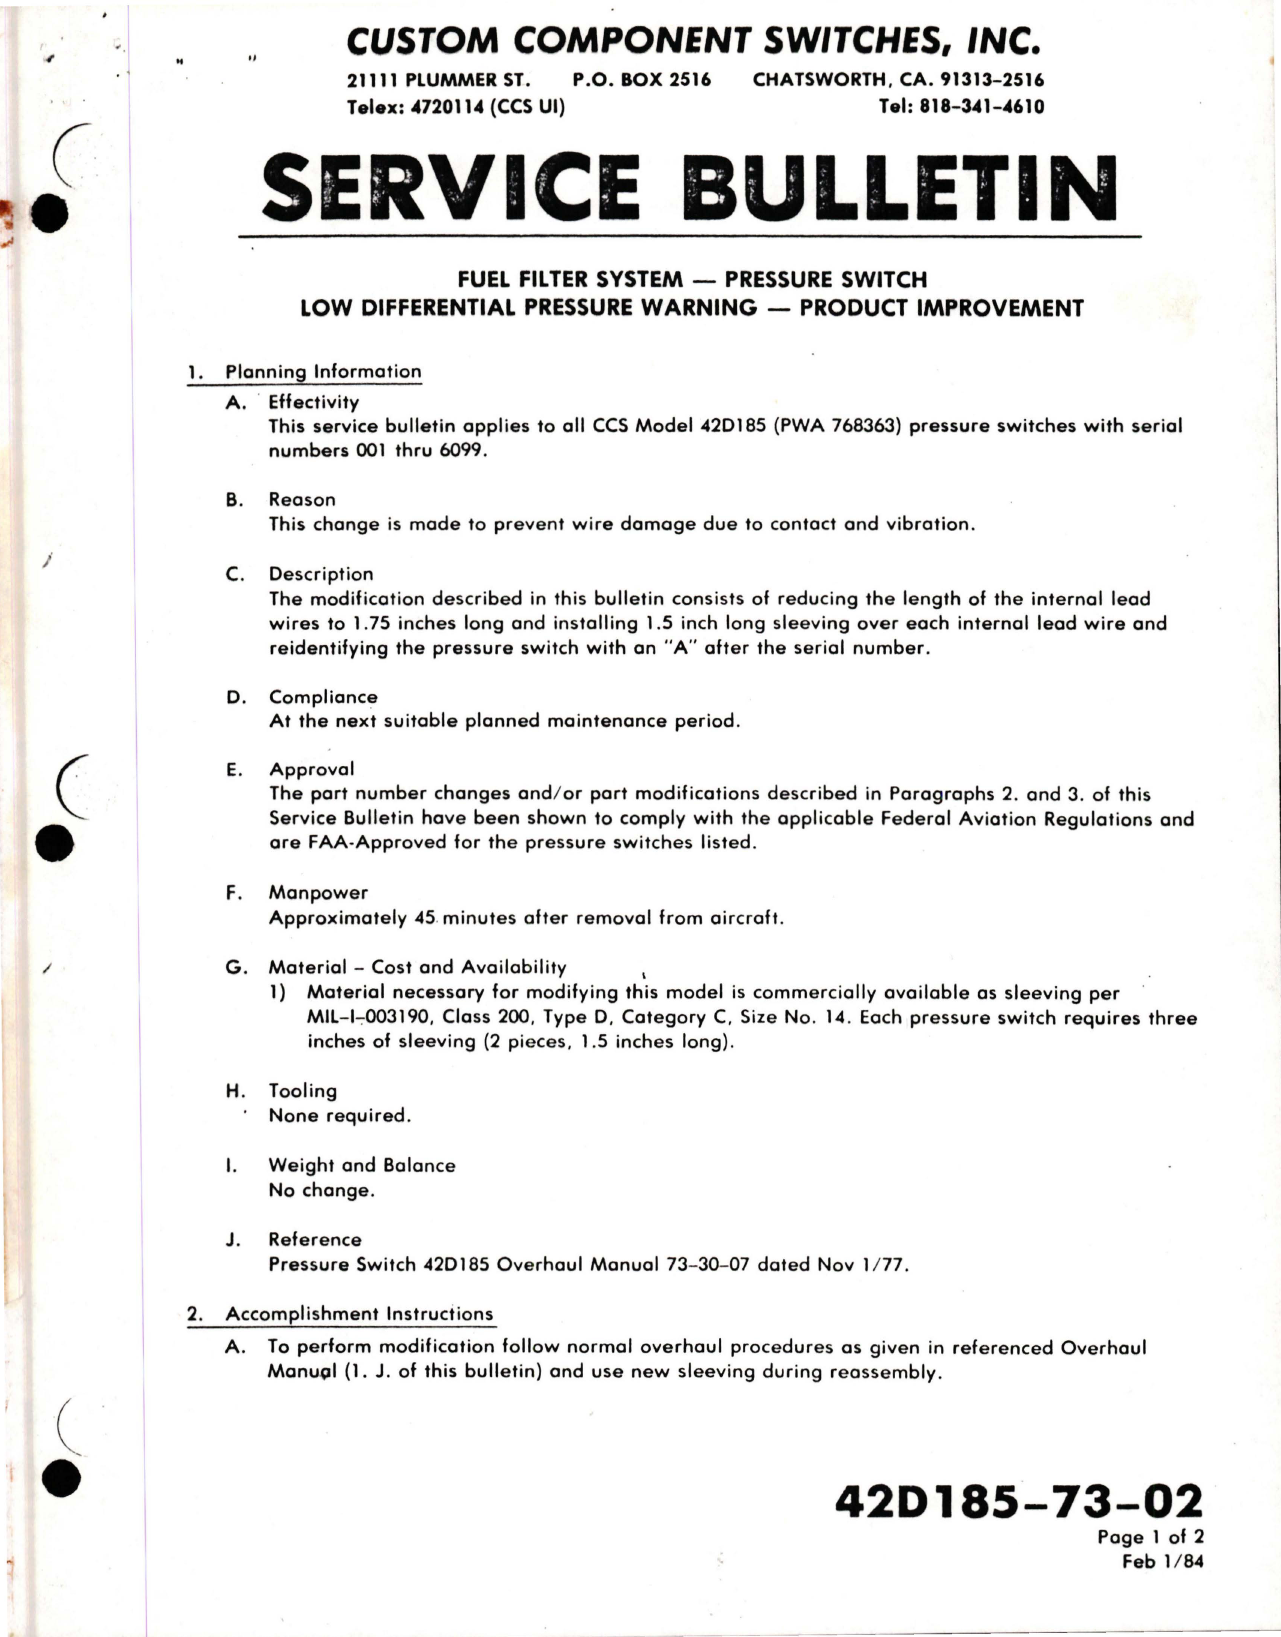 Sample page 1 from AirCorps Library document: Fuel Filter System Pressure Switch - Low Differential Pressure Warning